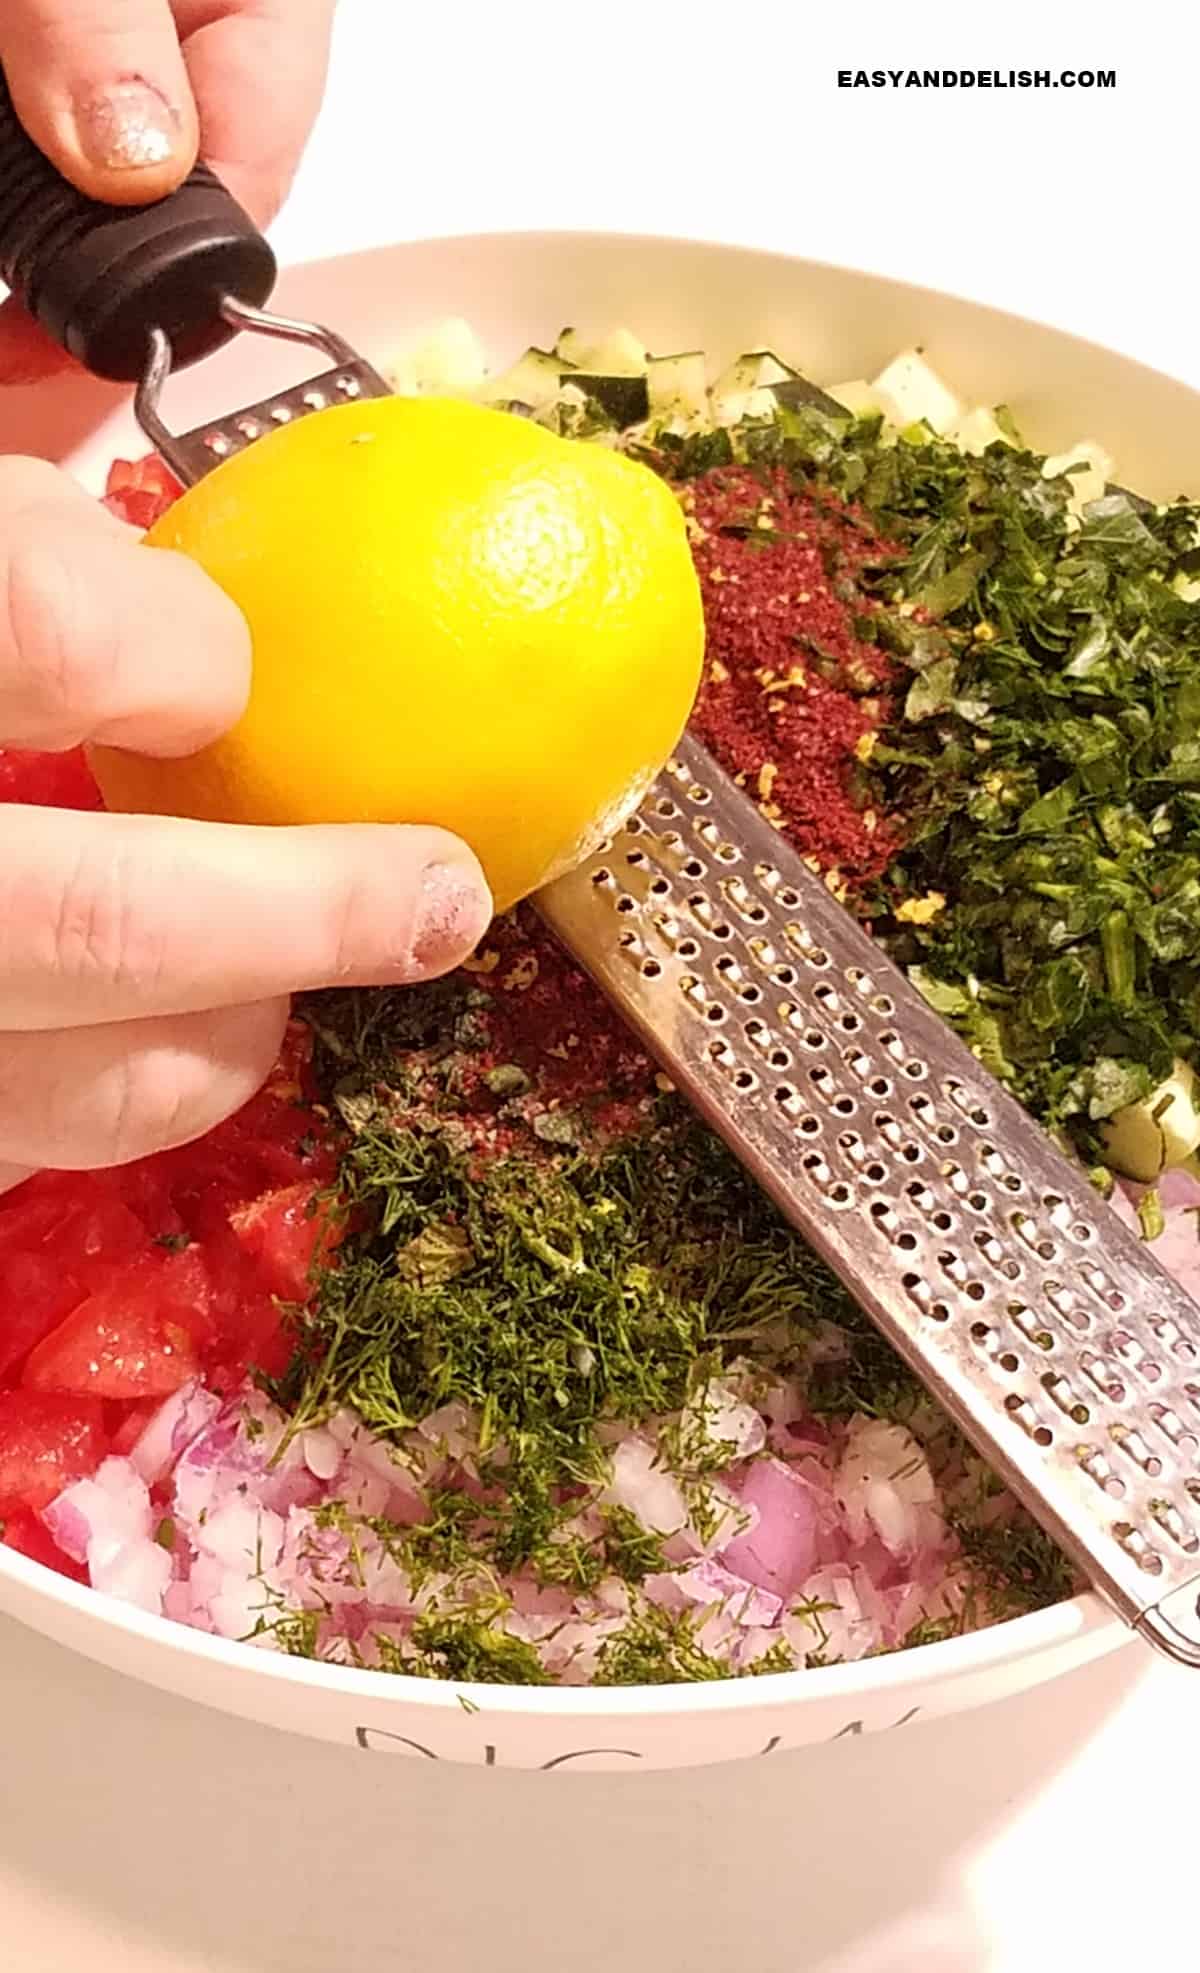 zest of lemon added to a bowl.